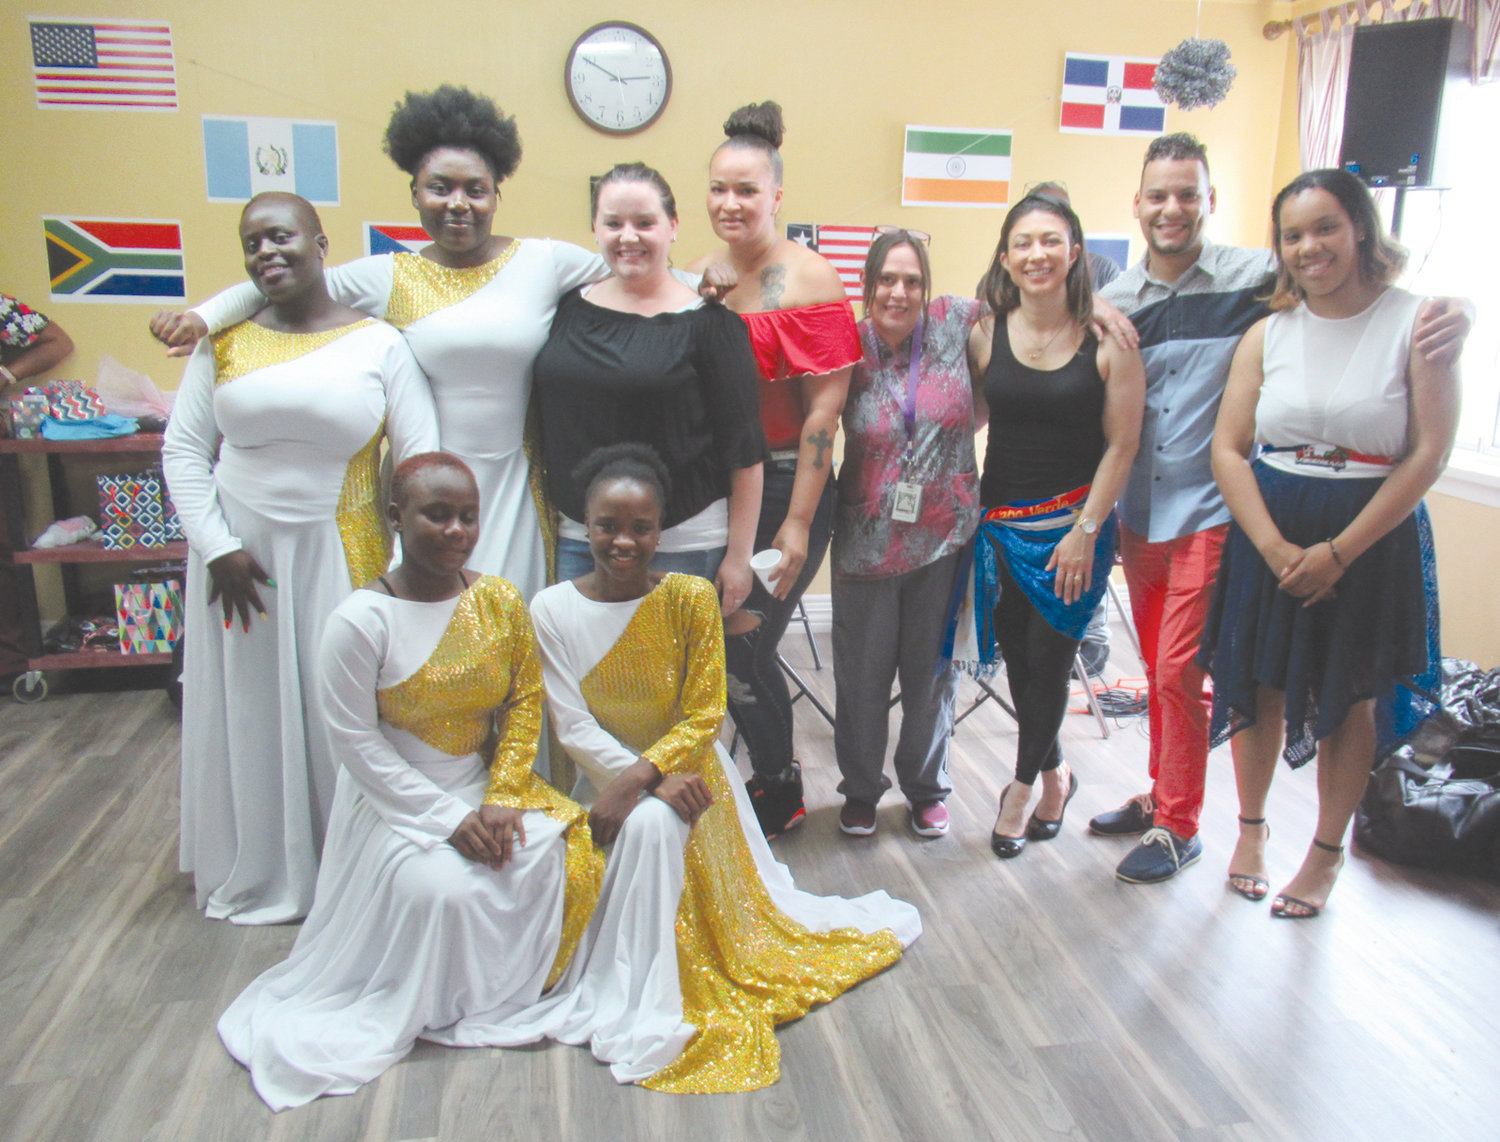 EXCELLENT ENTERTAINERS: These are all the Briarcliffe manor employees who recently treated residents to an exciting and entertaining Latin Dance Off event in Johnston.